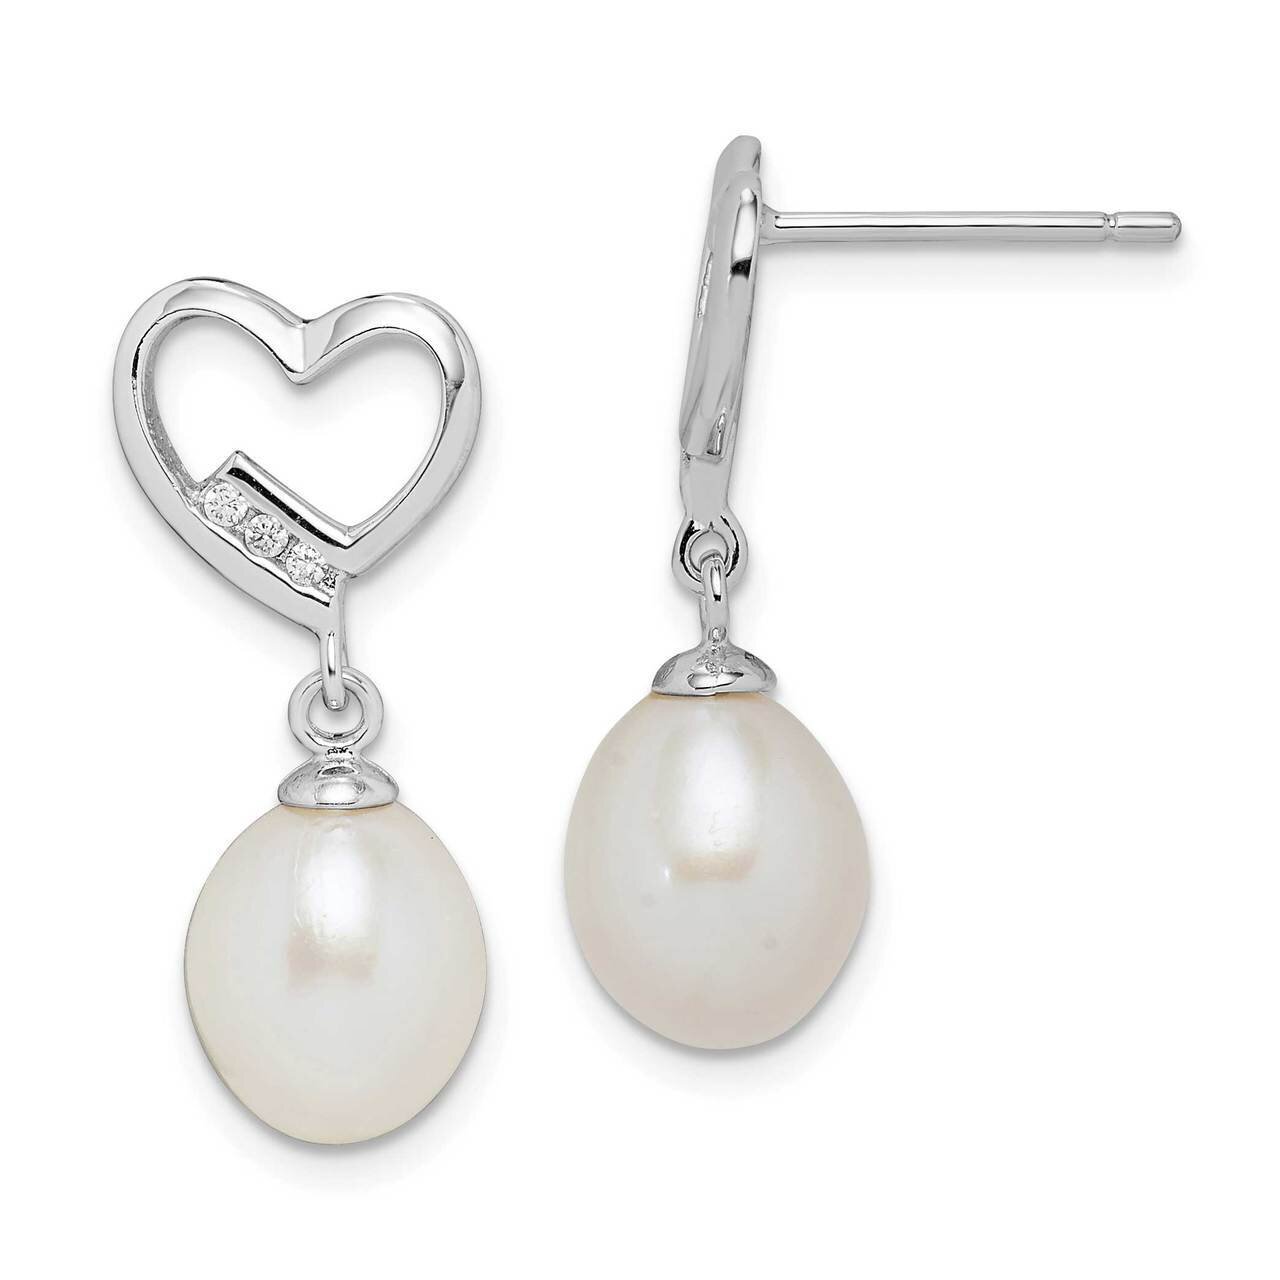 7-8mm White Rice Freshwater Cultured Pearl CZ Diamond Earrings Sterling Silver Rhodium Plated QE15206